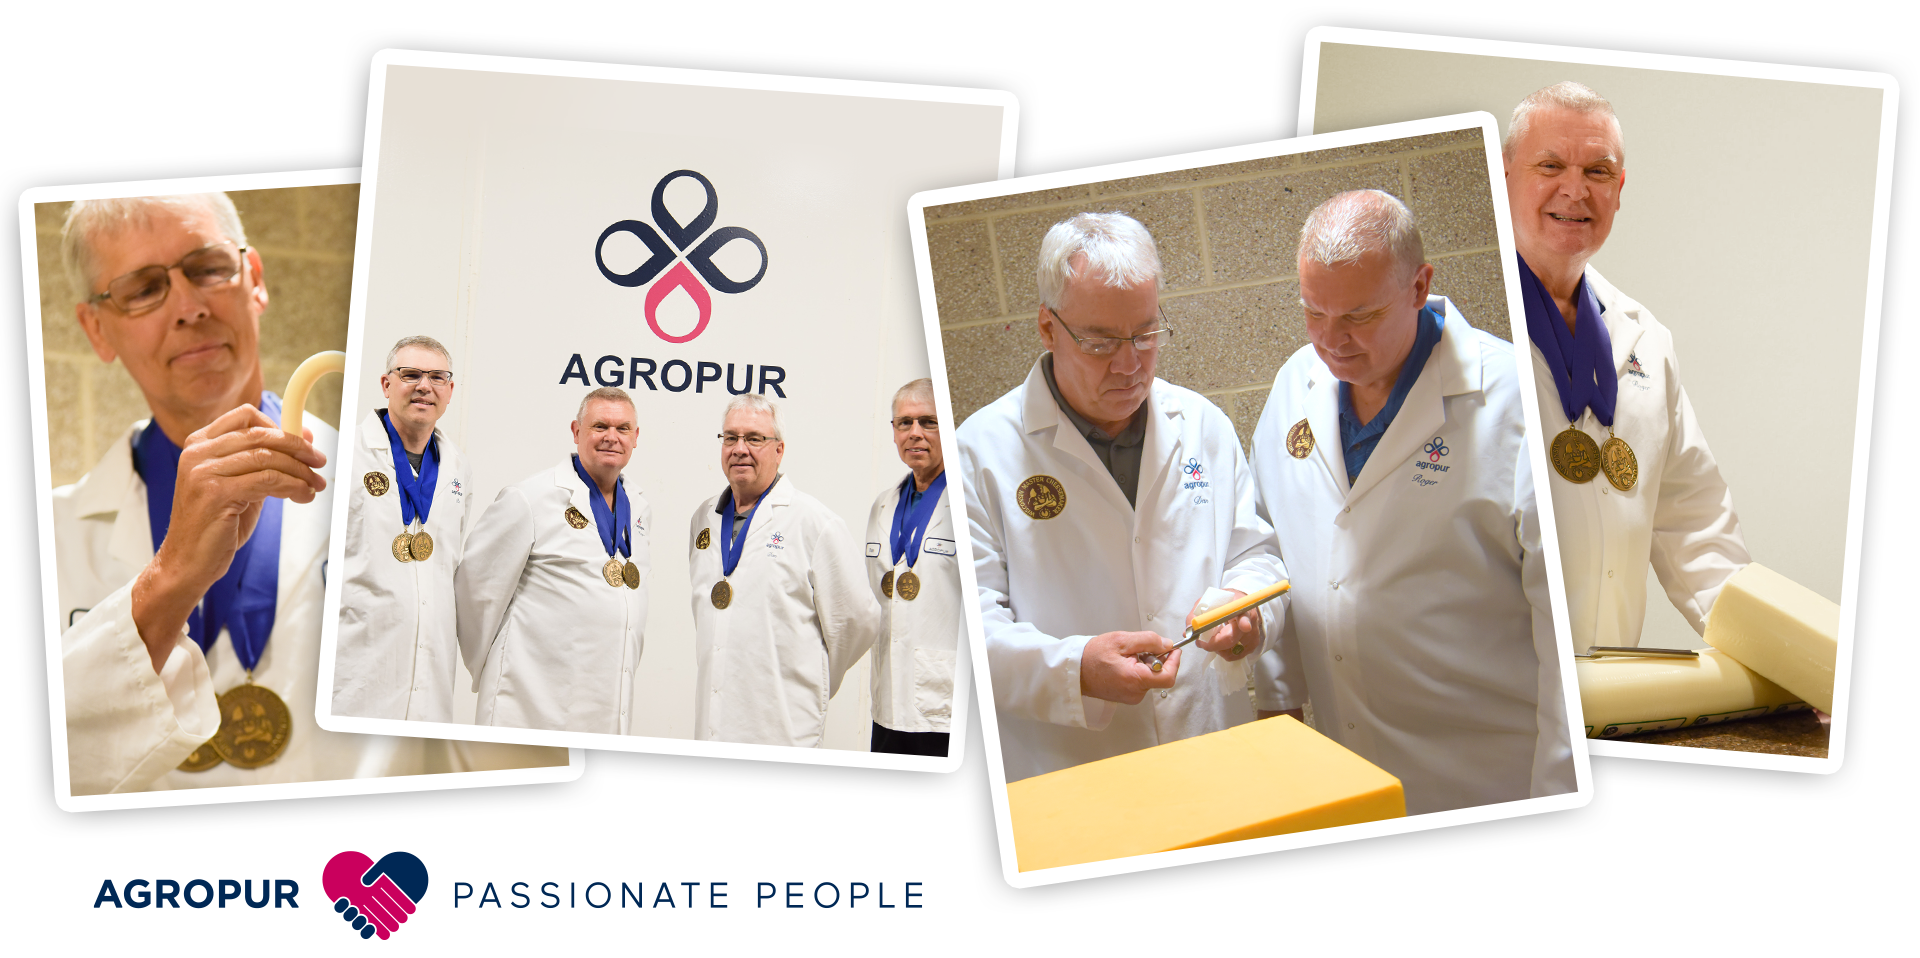 Agropur’s Master Cheesemakers bring passion, artistic skill to their craft